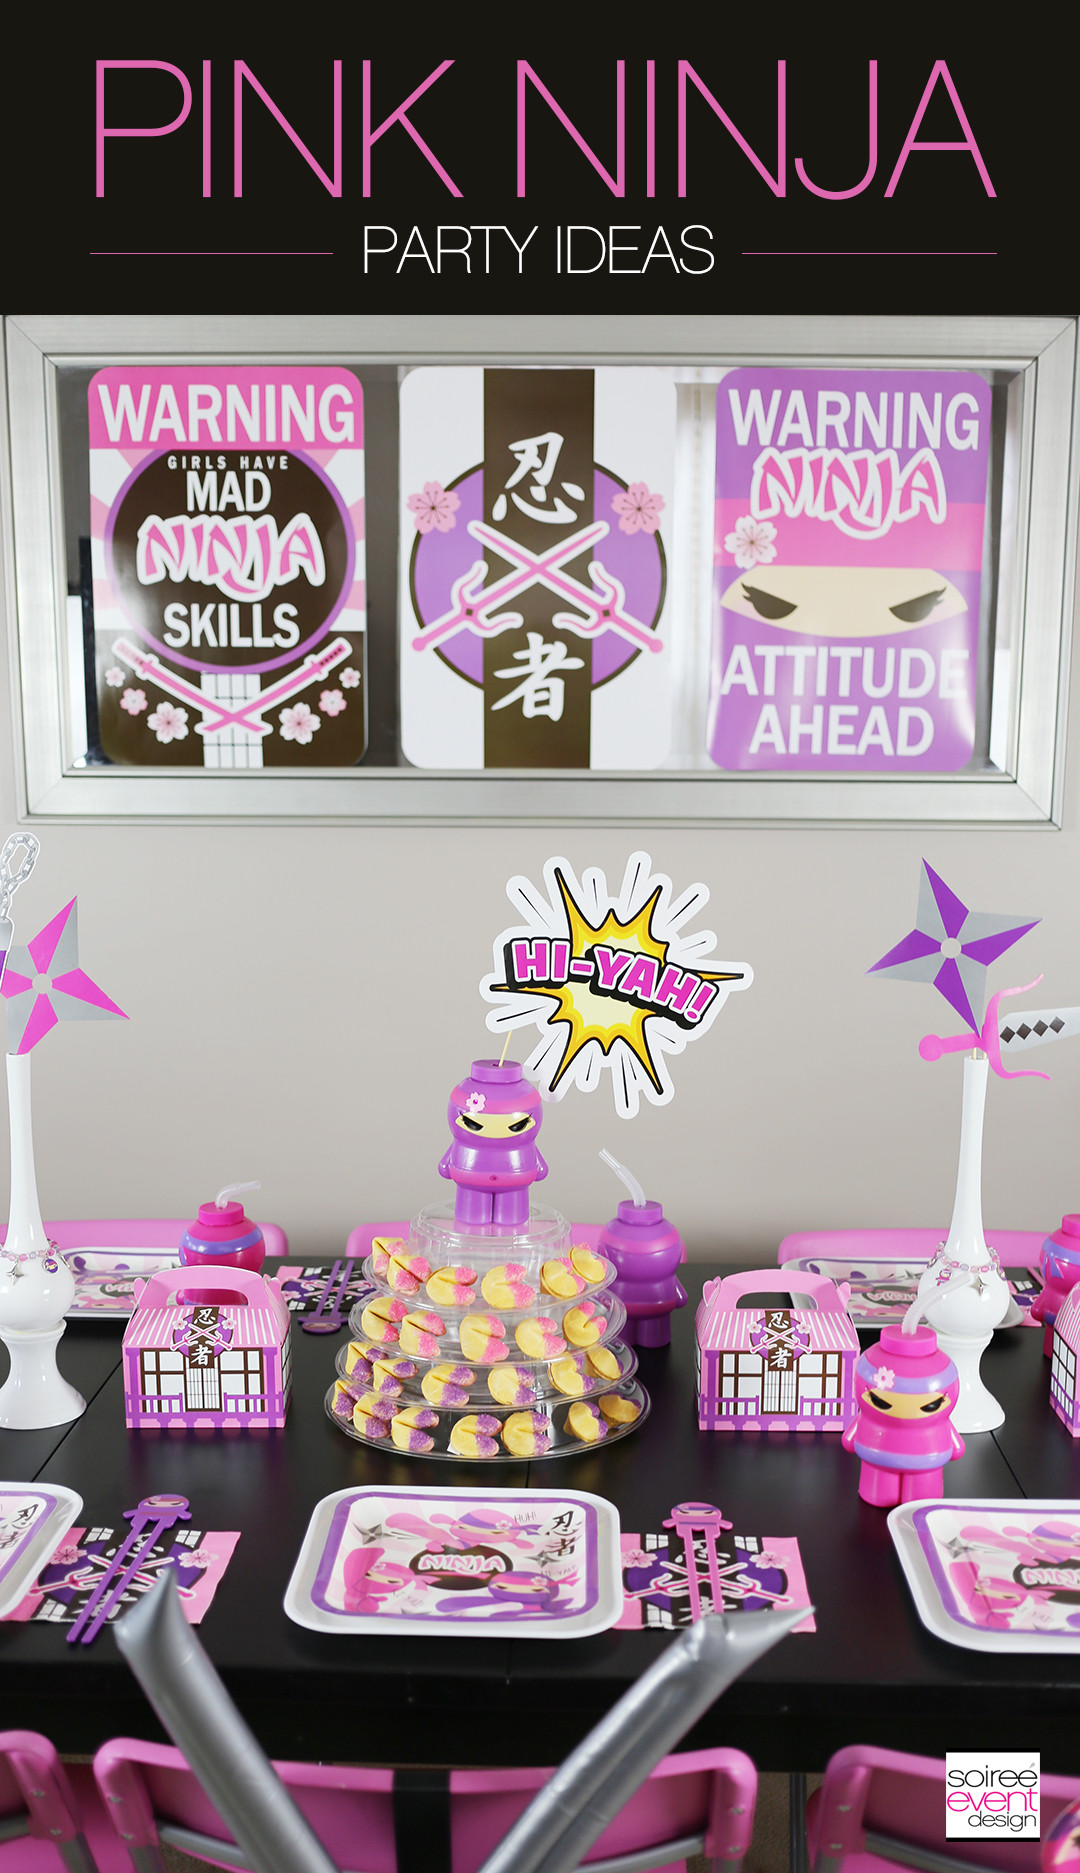 Ninja Birthday Party Ideas
 TREND ALERT How to Host a Pink Ninja Party for Girls